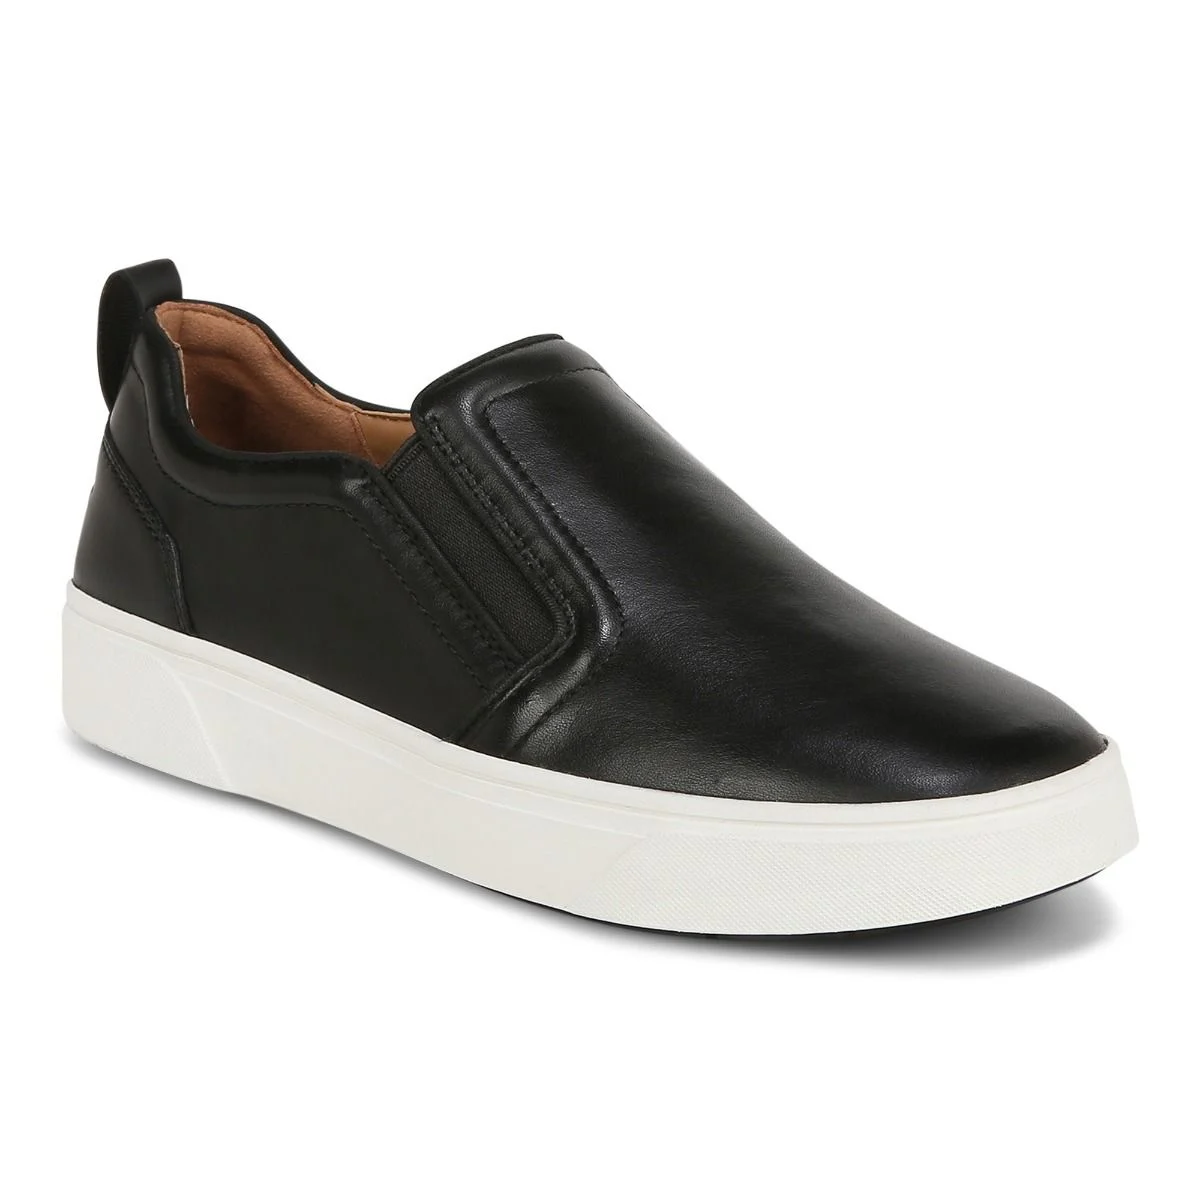 Women's Vionic Kimmie Sneaker - Black Leather | Stan's Fit For Your Feet